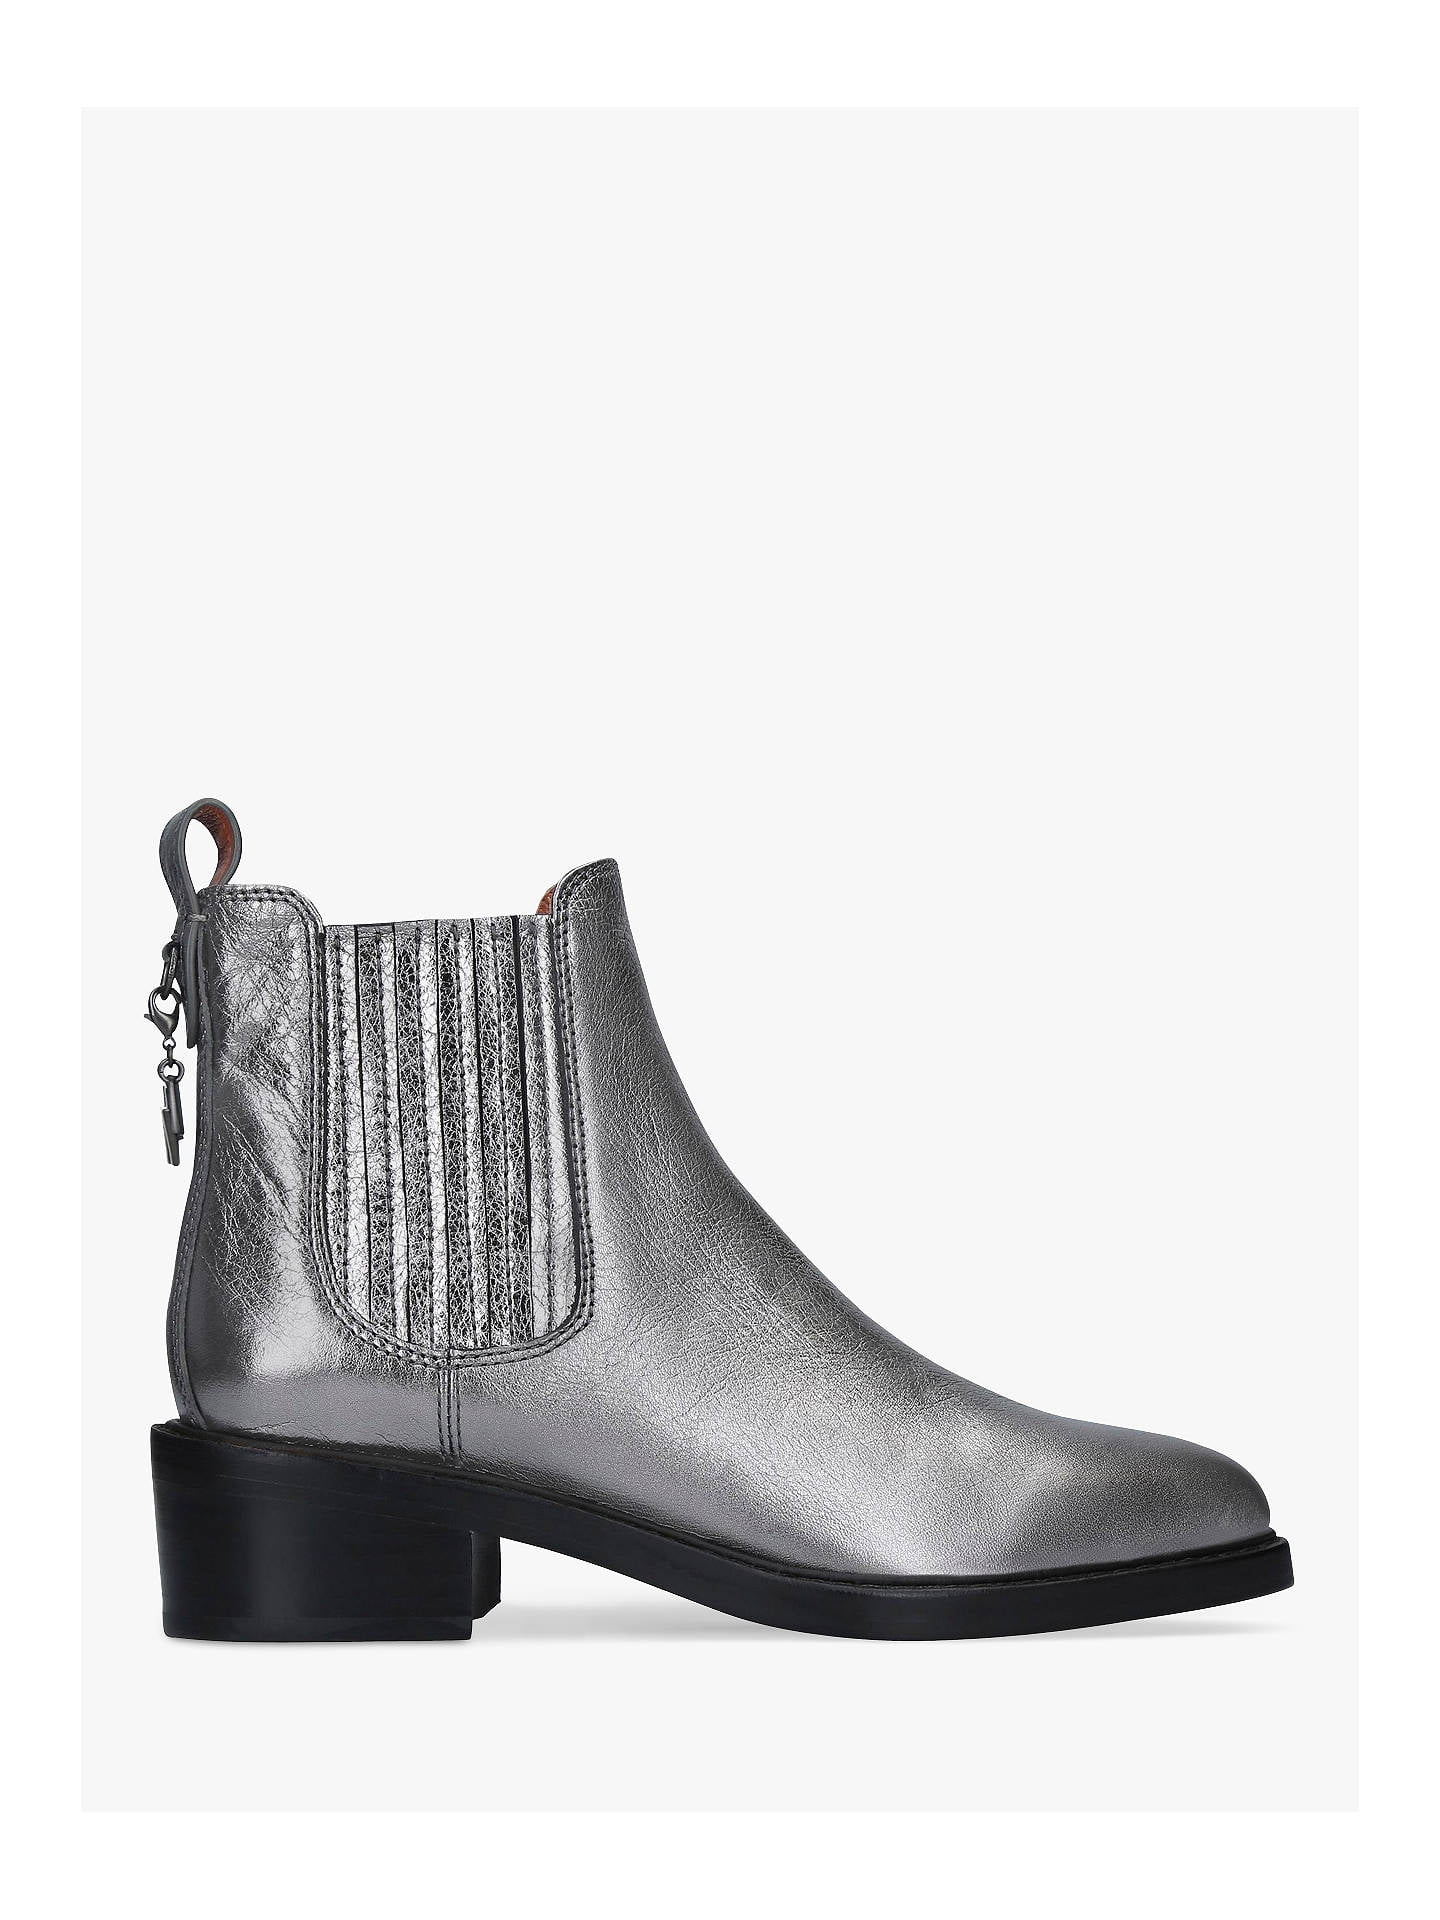 coach bowery bootie